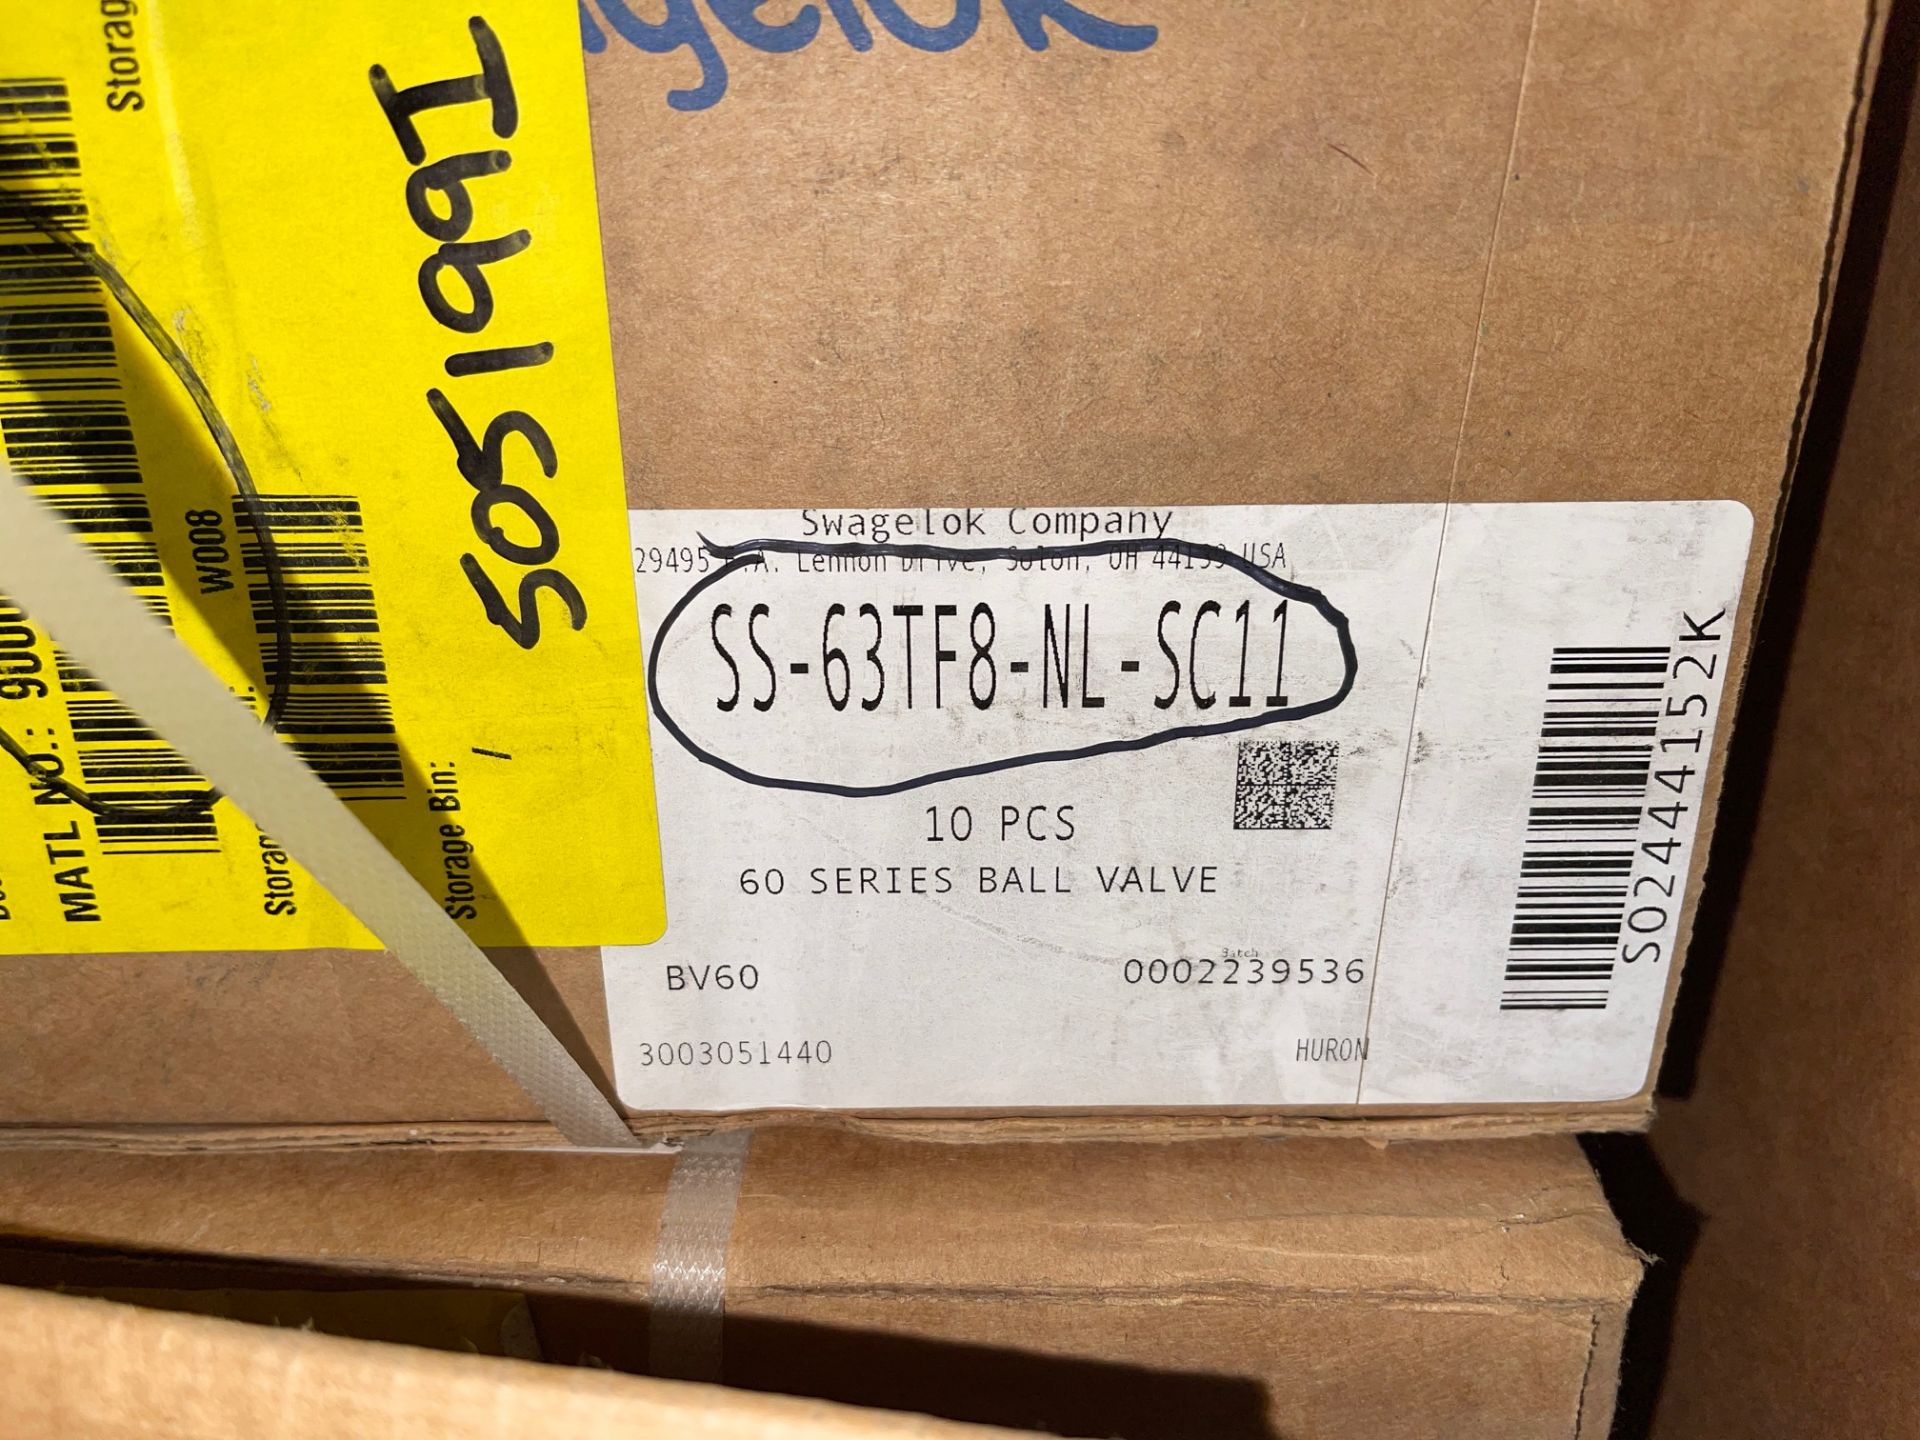 20 TIMES SS DASH63TF8 DASH NL DASH FC11, SERIES 60 S/S SWAGELOK, BALL VALVES, NEW IN BOXES 20 - Image 3 of 3